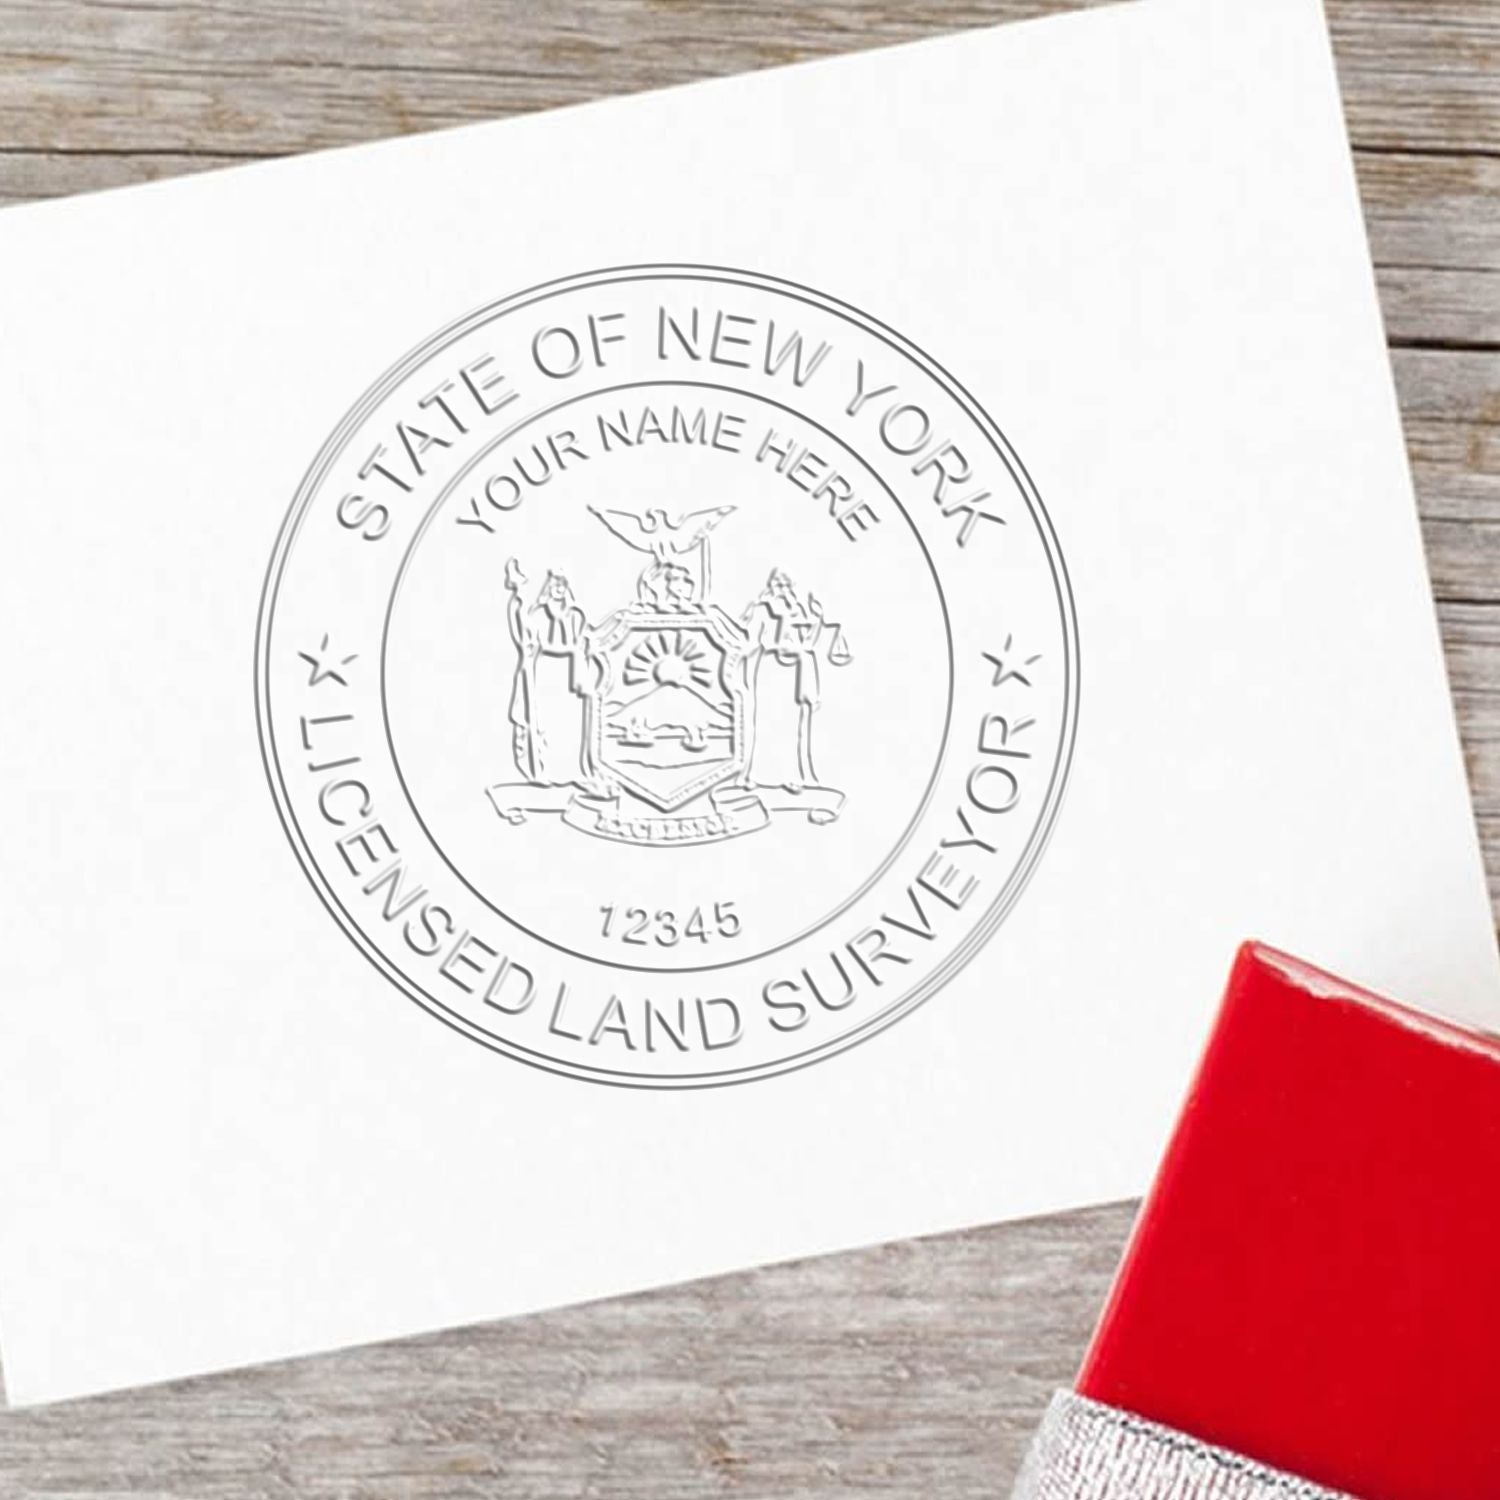 An alternative view of the Heavy Duty Cast Iron New York Land Surveyor Seal Embosser stamped on a sheet of paper showing the image in use